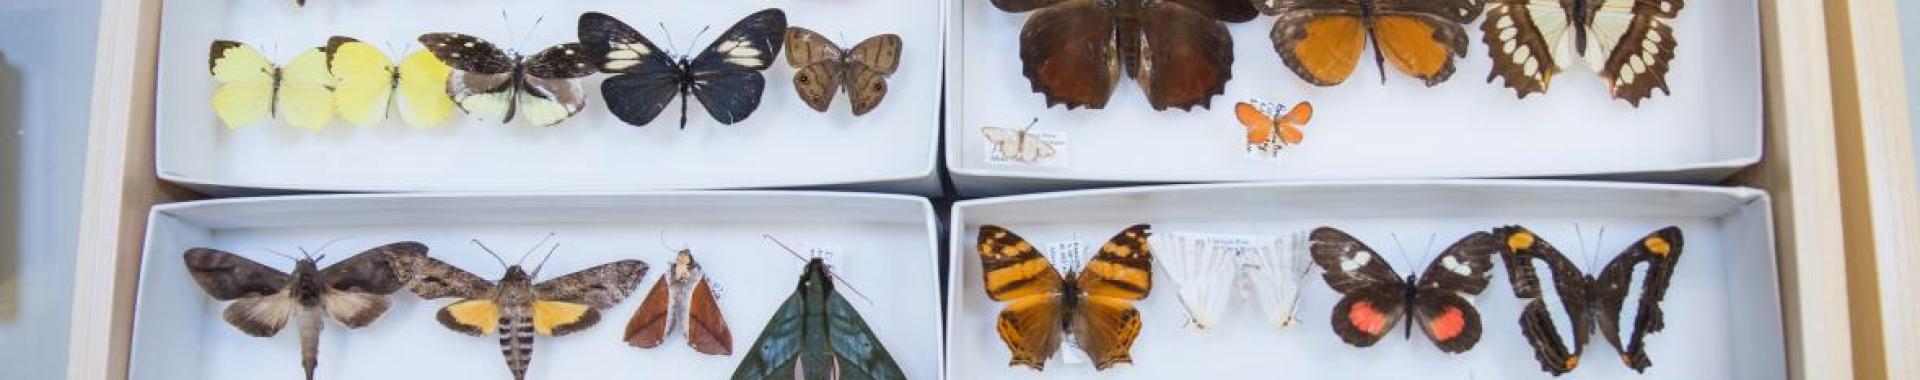 Butterflies from ASU's natual history collection.